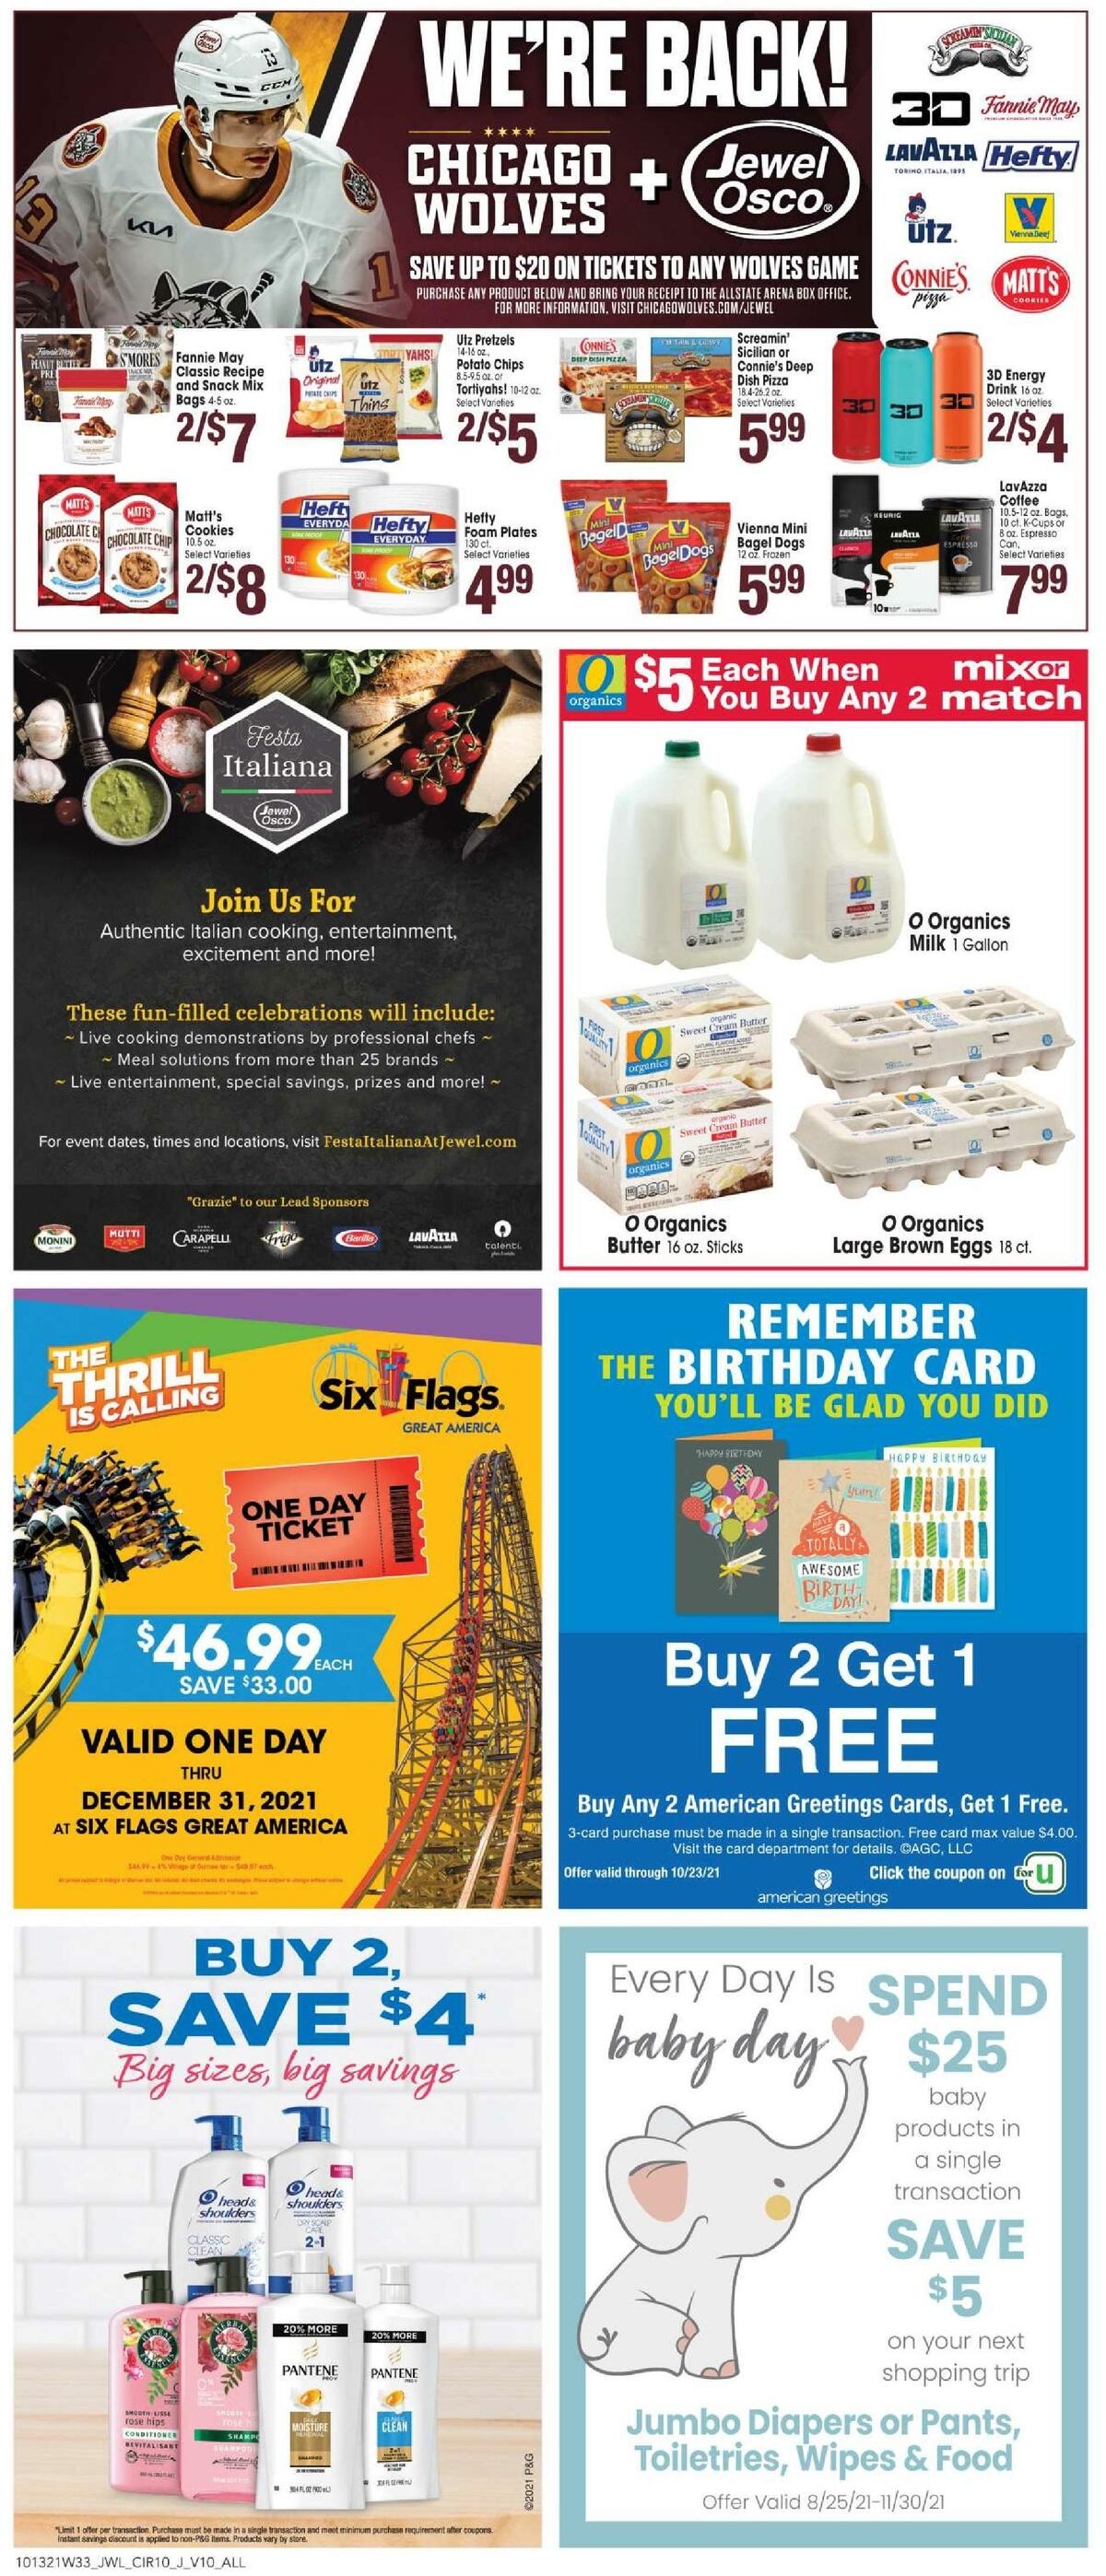 Jewel Osco Weekly Ad from October 13